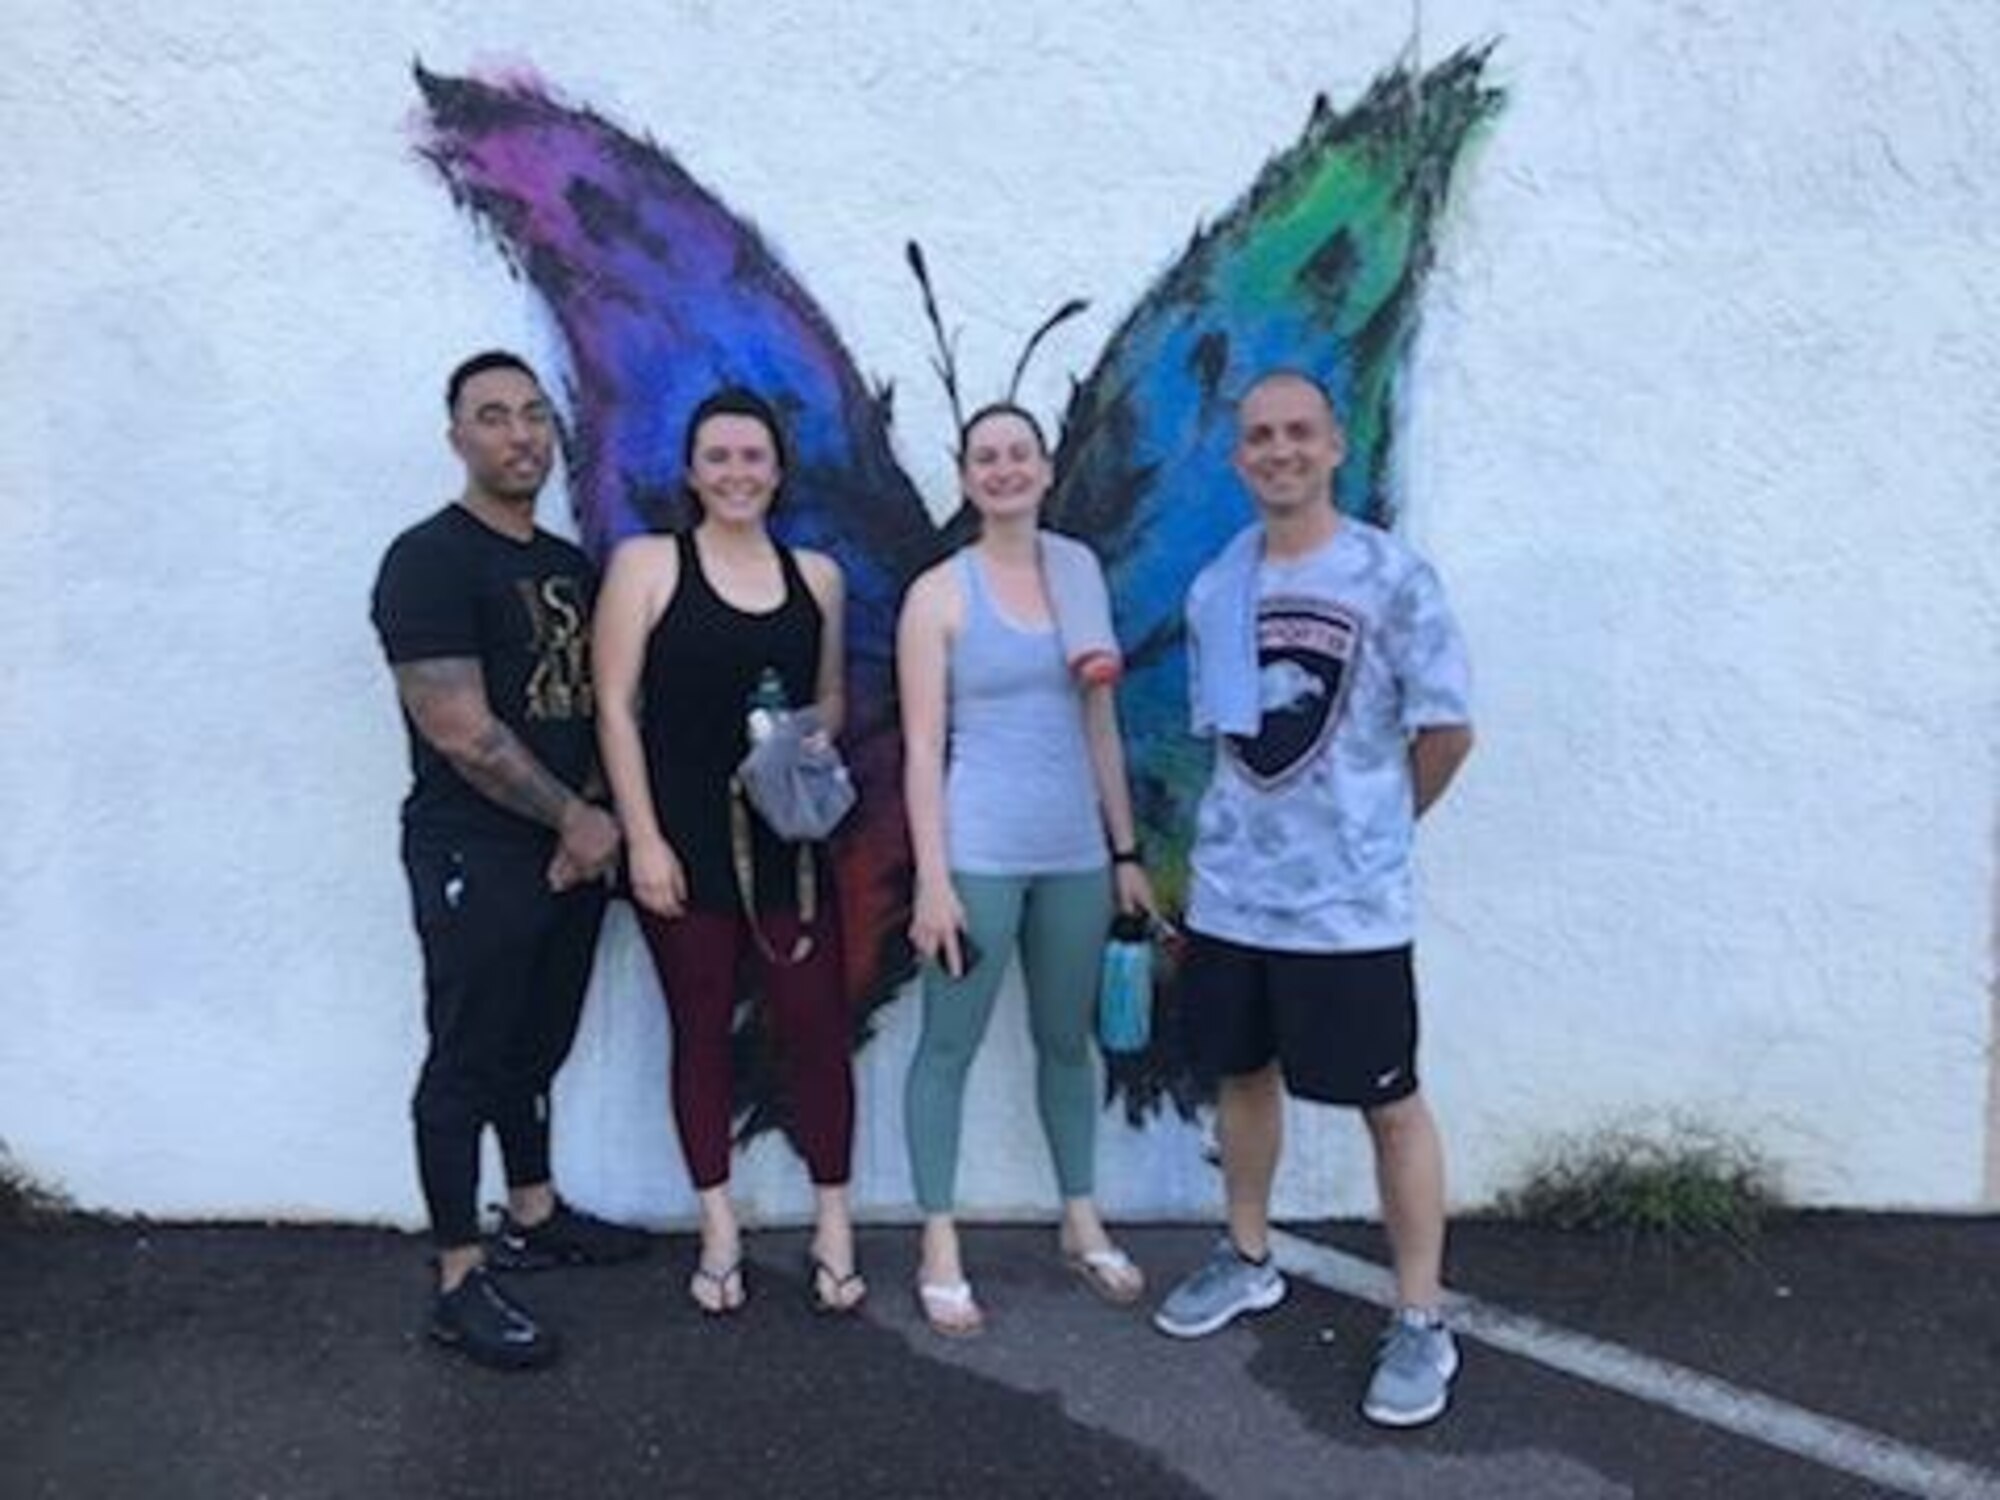 U.S. Air Force Staff Sgt. Sanchez Banks, Staff Sgt. Marissa Nelson, Tech. Sgt. Shawna Wise, and Master Sgt. Matthew Orlando, the 6th Force Support Squadron Airman Leadership School instructor team, pause for a photo after a workout Sept. 2019 in Tampa, Fla